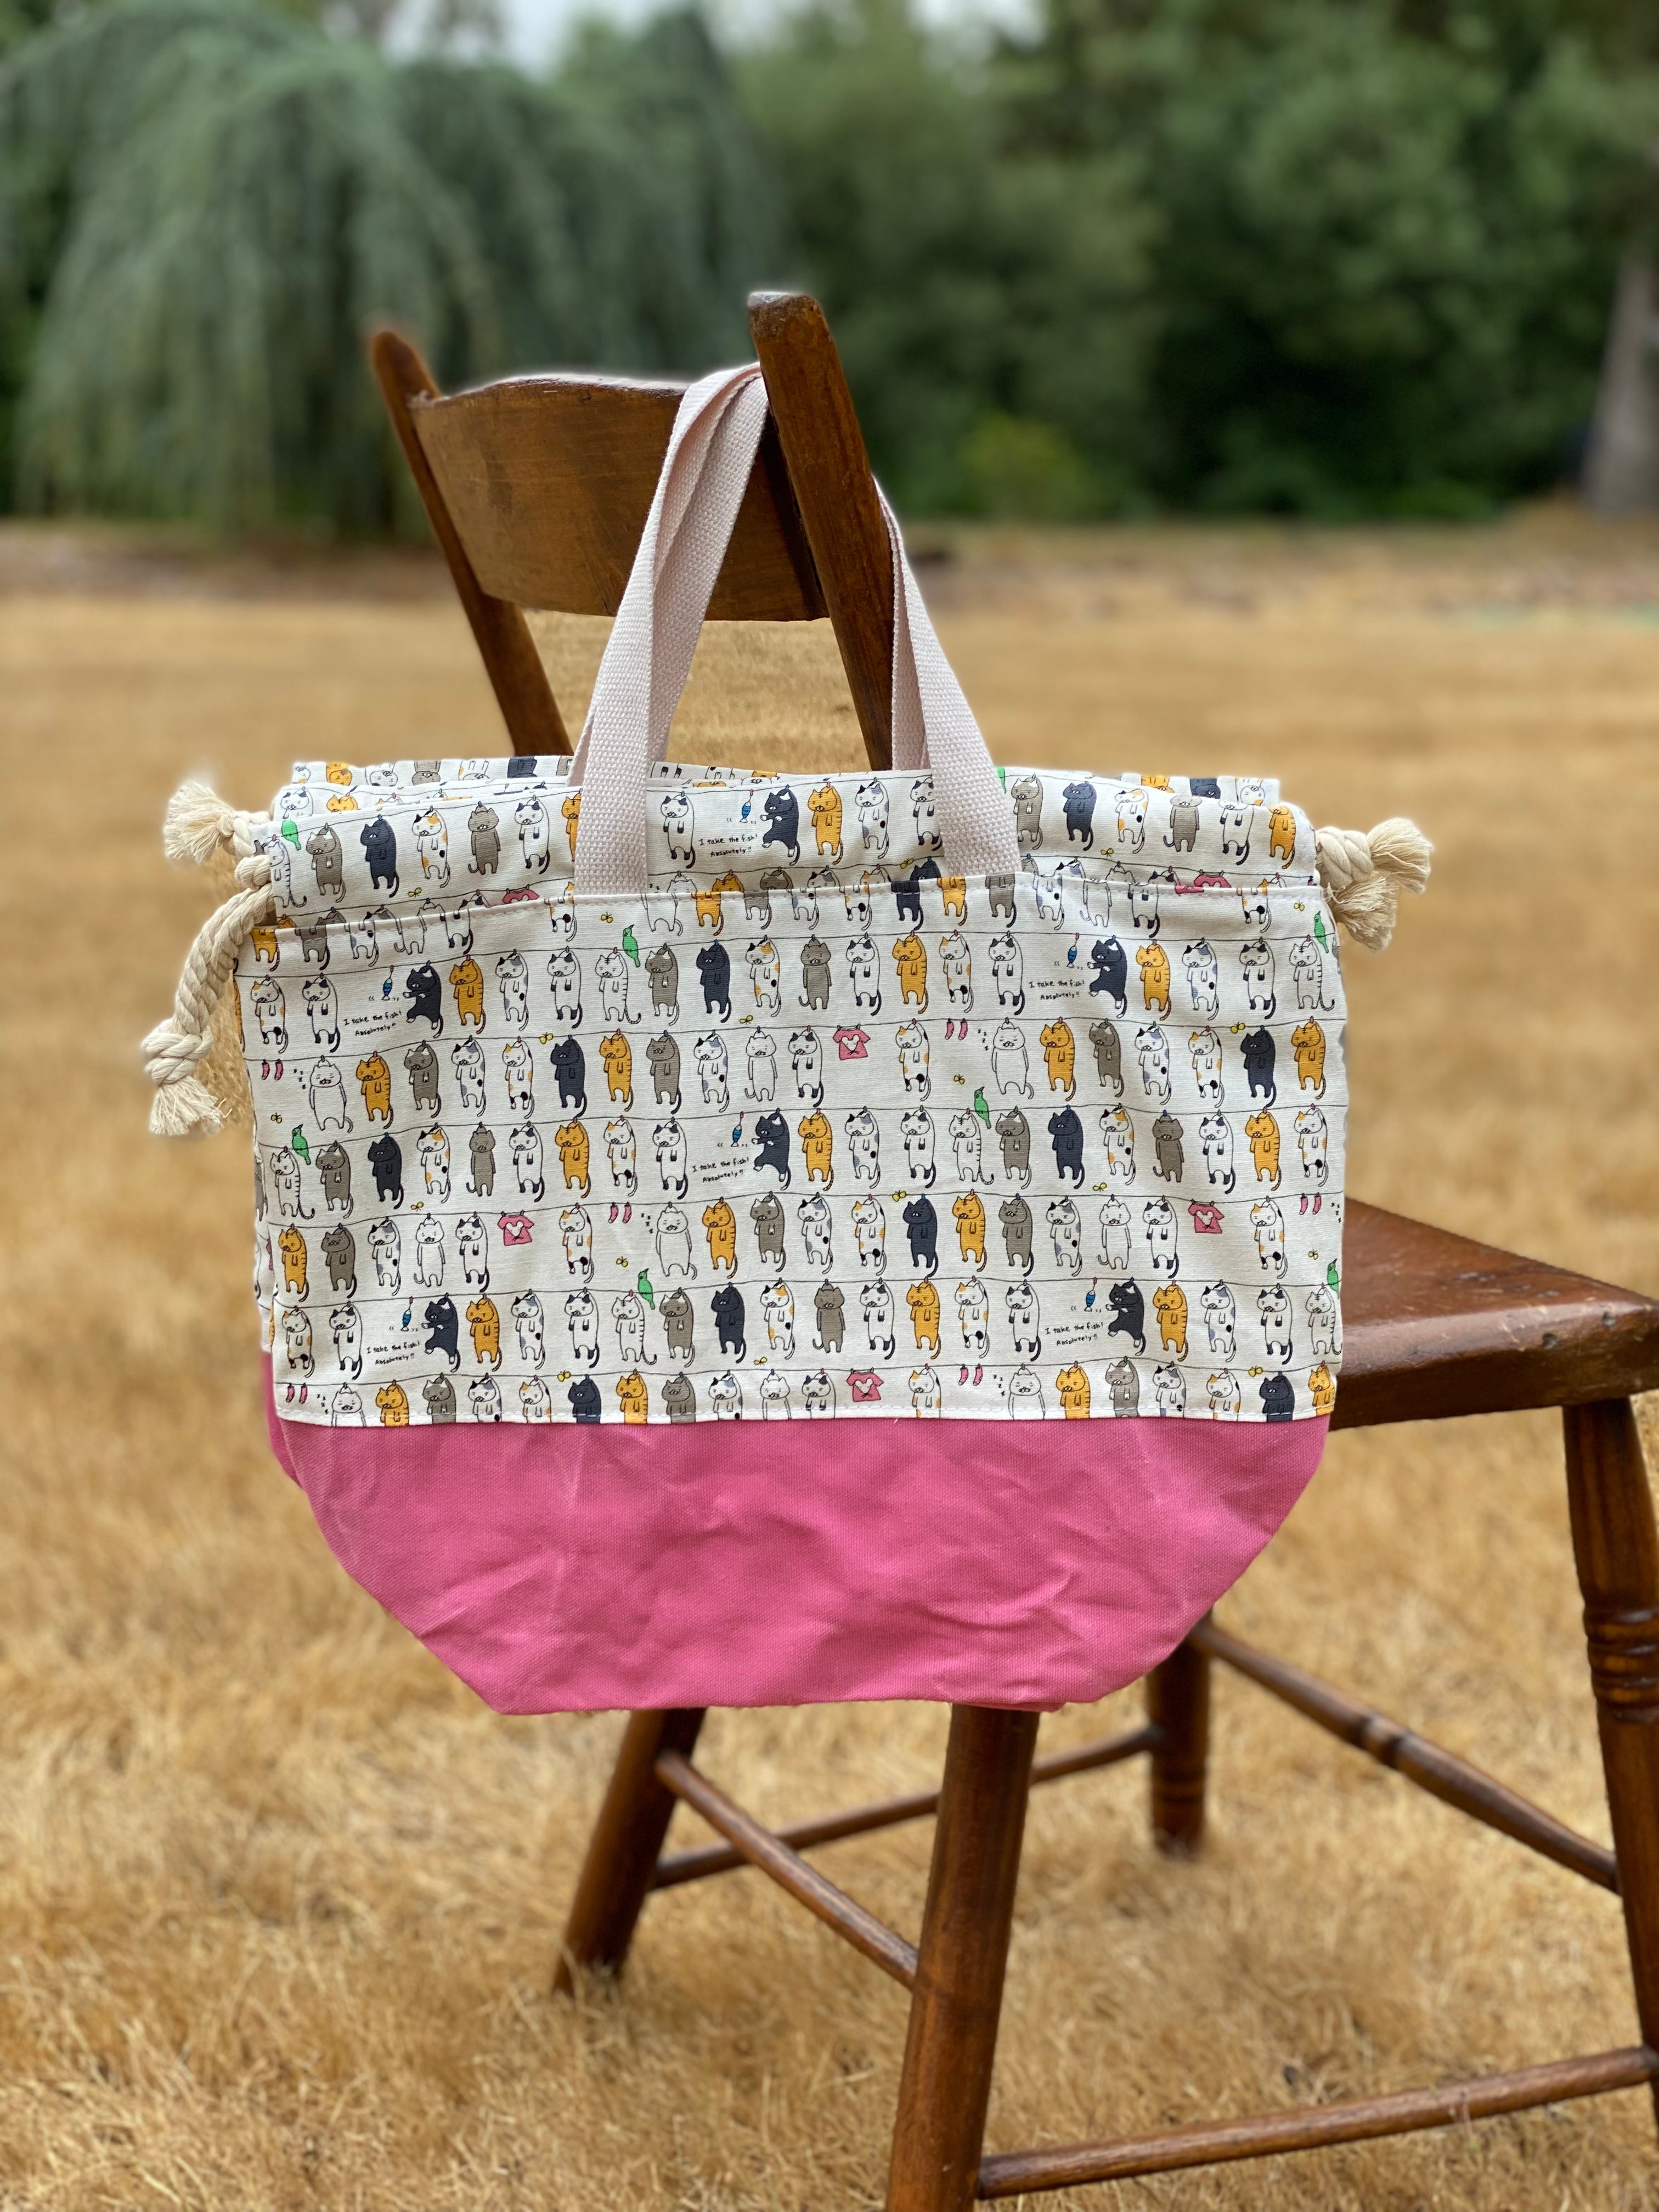 Clothesline Cats Waxed Canvas Project Bag, Whimsical Cats on a Clothes Line, Canvas Knitting Bag, Crochet Bag, Drawstring Bag